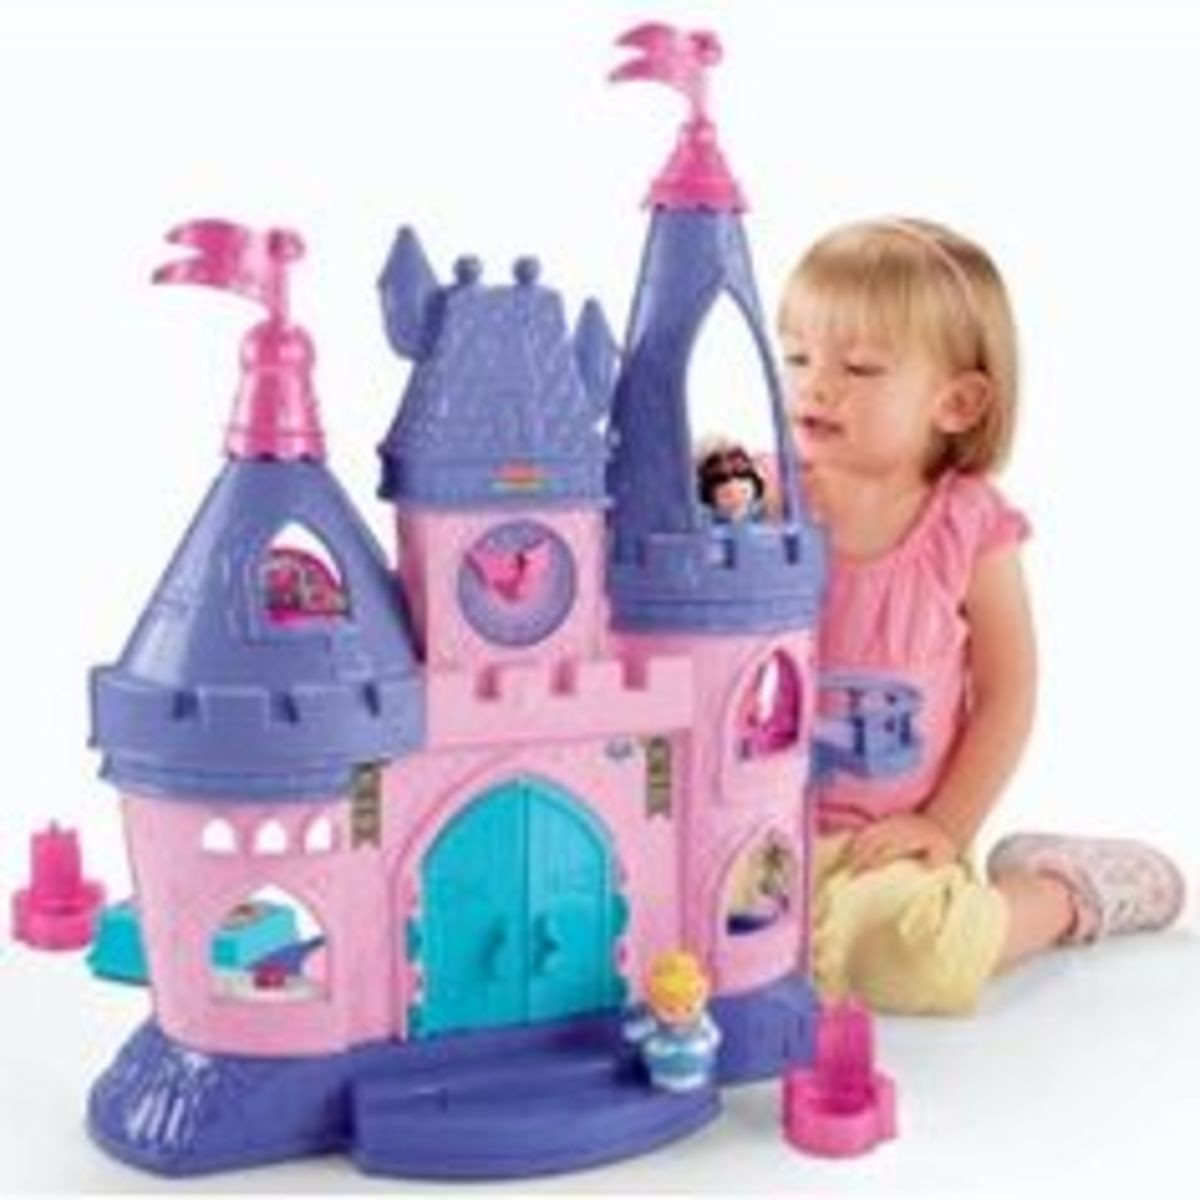 Christmas Gift Ideas For 2 Year Old Baby Girl
 Best Christmas Gift Ideas For A 2 Year Old Baby Girl